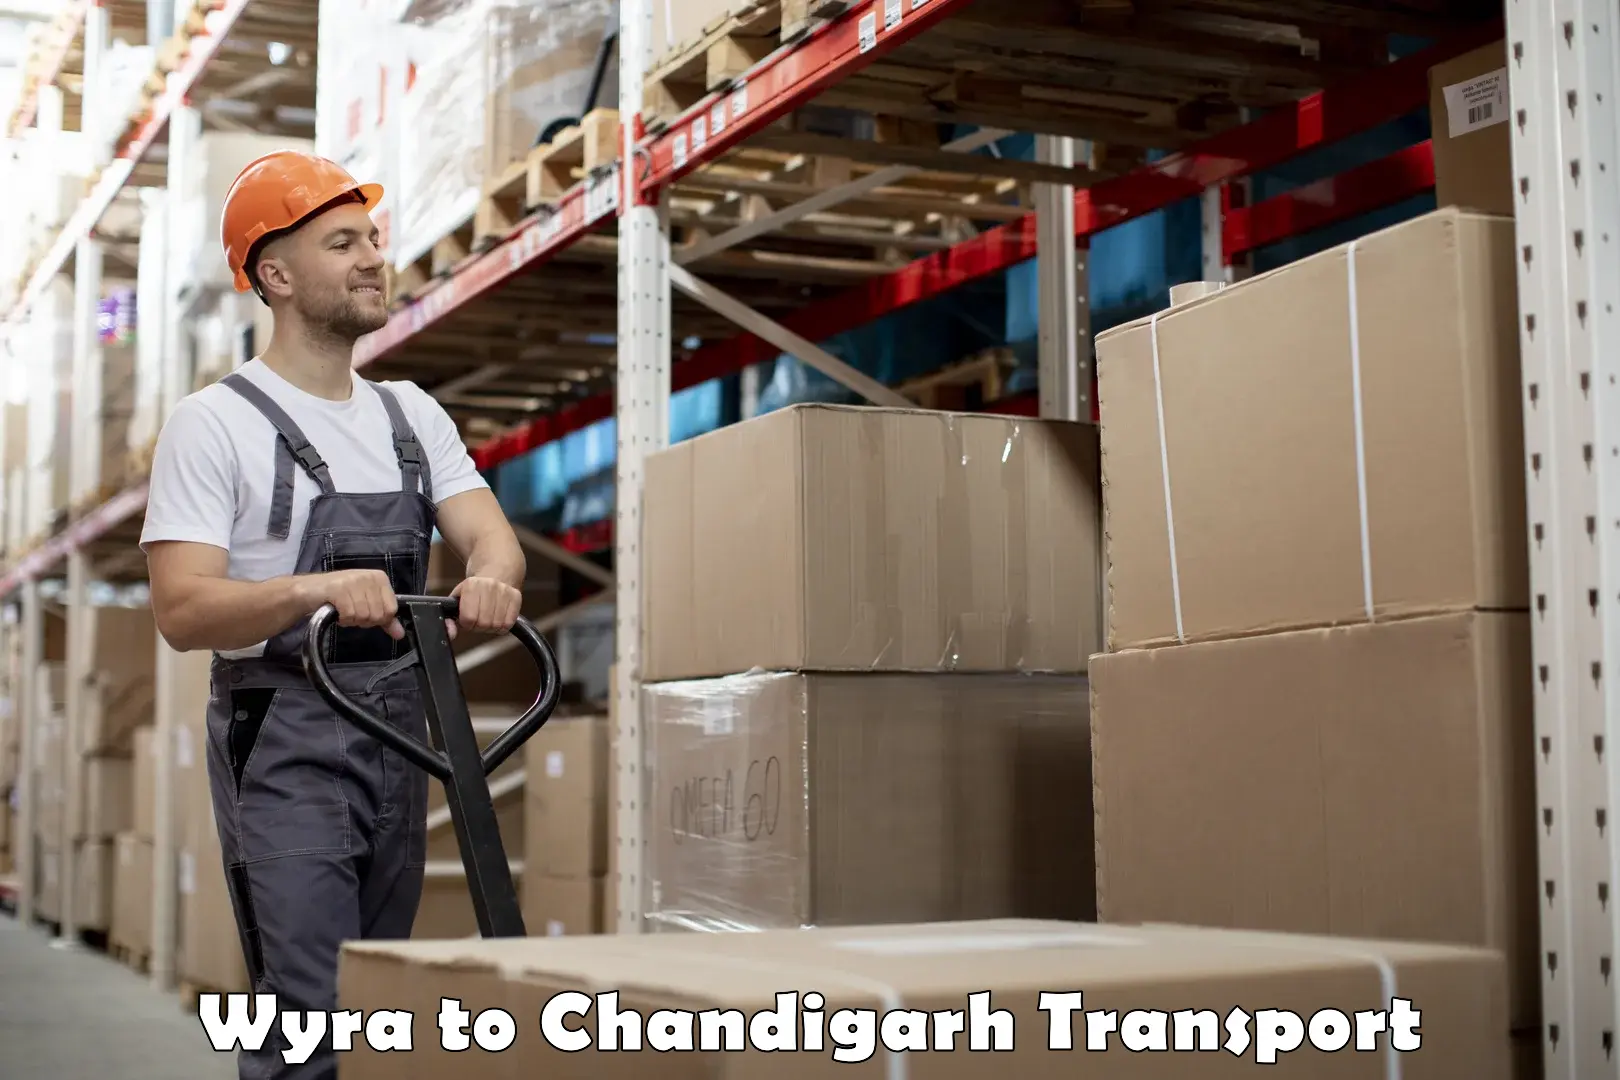 Truck transport companies in India Wyra to Chandigarh